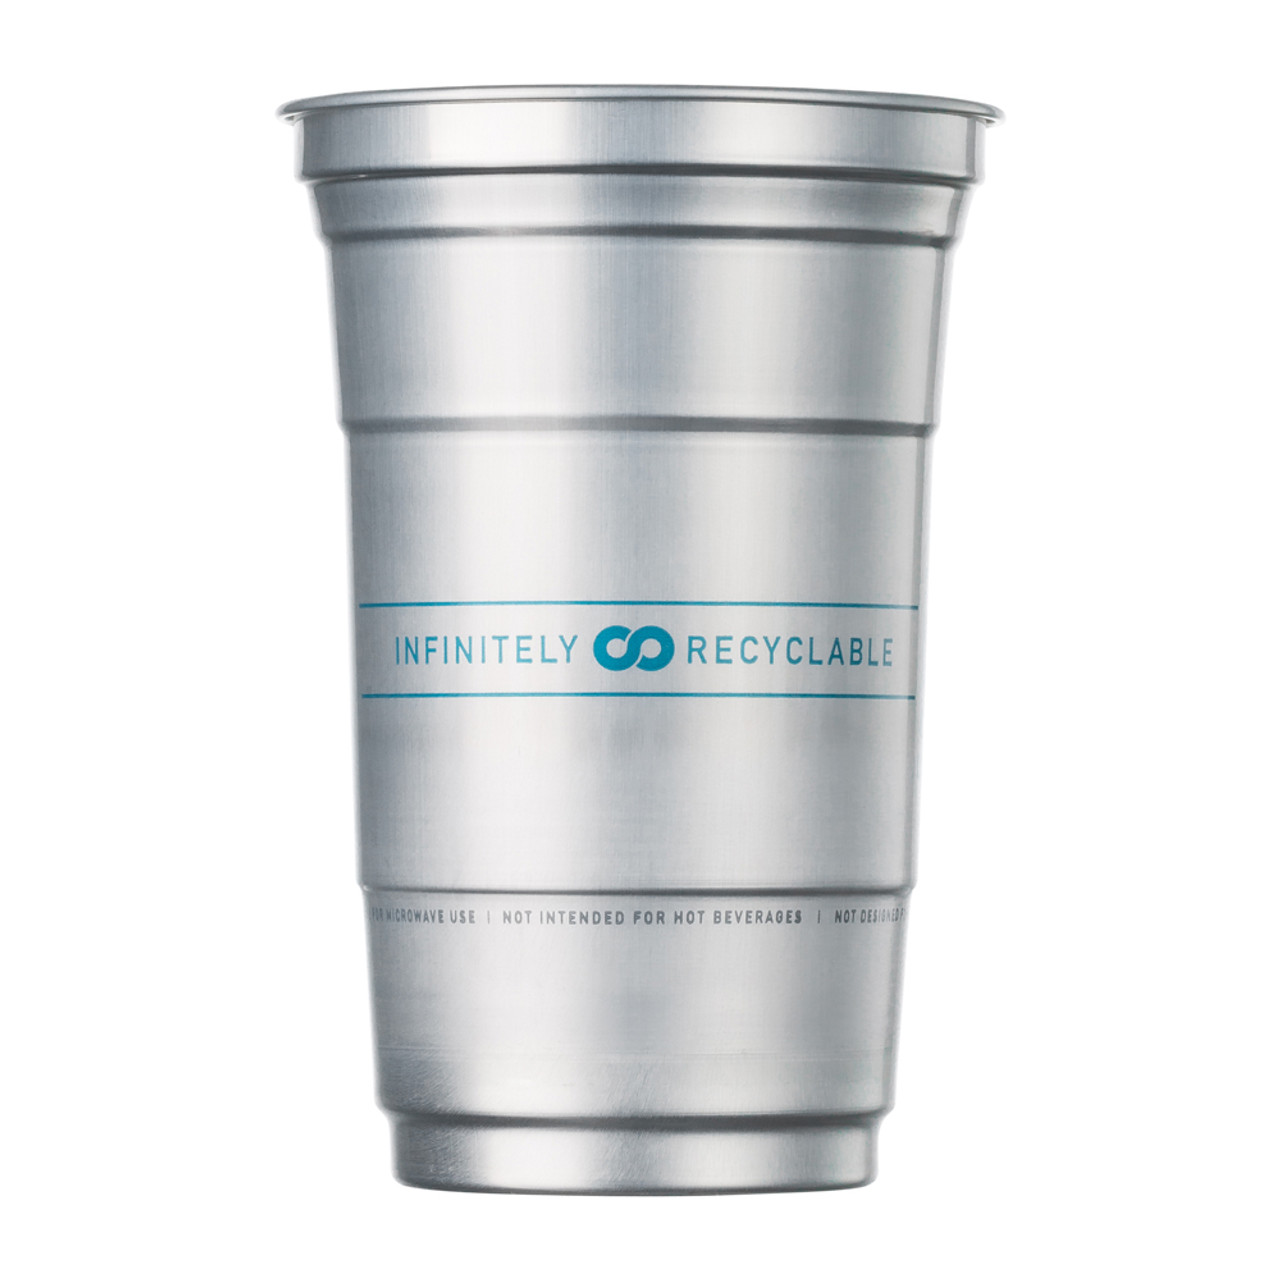 https://cdn11.bigcommerce.com/s-cznxq08r7/images/stencil/1280x1280/products/5019/13915/730169-Ball-Aluminum-Drink-Cups-The-Ultimate-100-Recyclable-Cold-Drink-Cup-20-oz-10-Pack-4__14635.1628540528.jpg?c=1